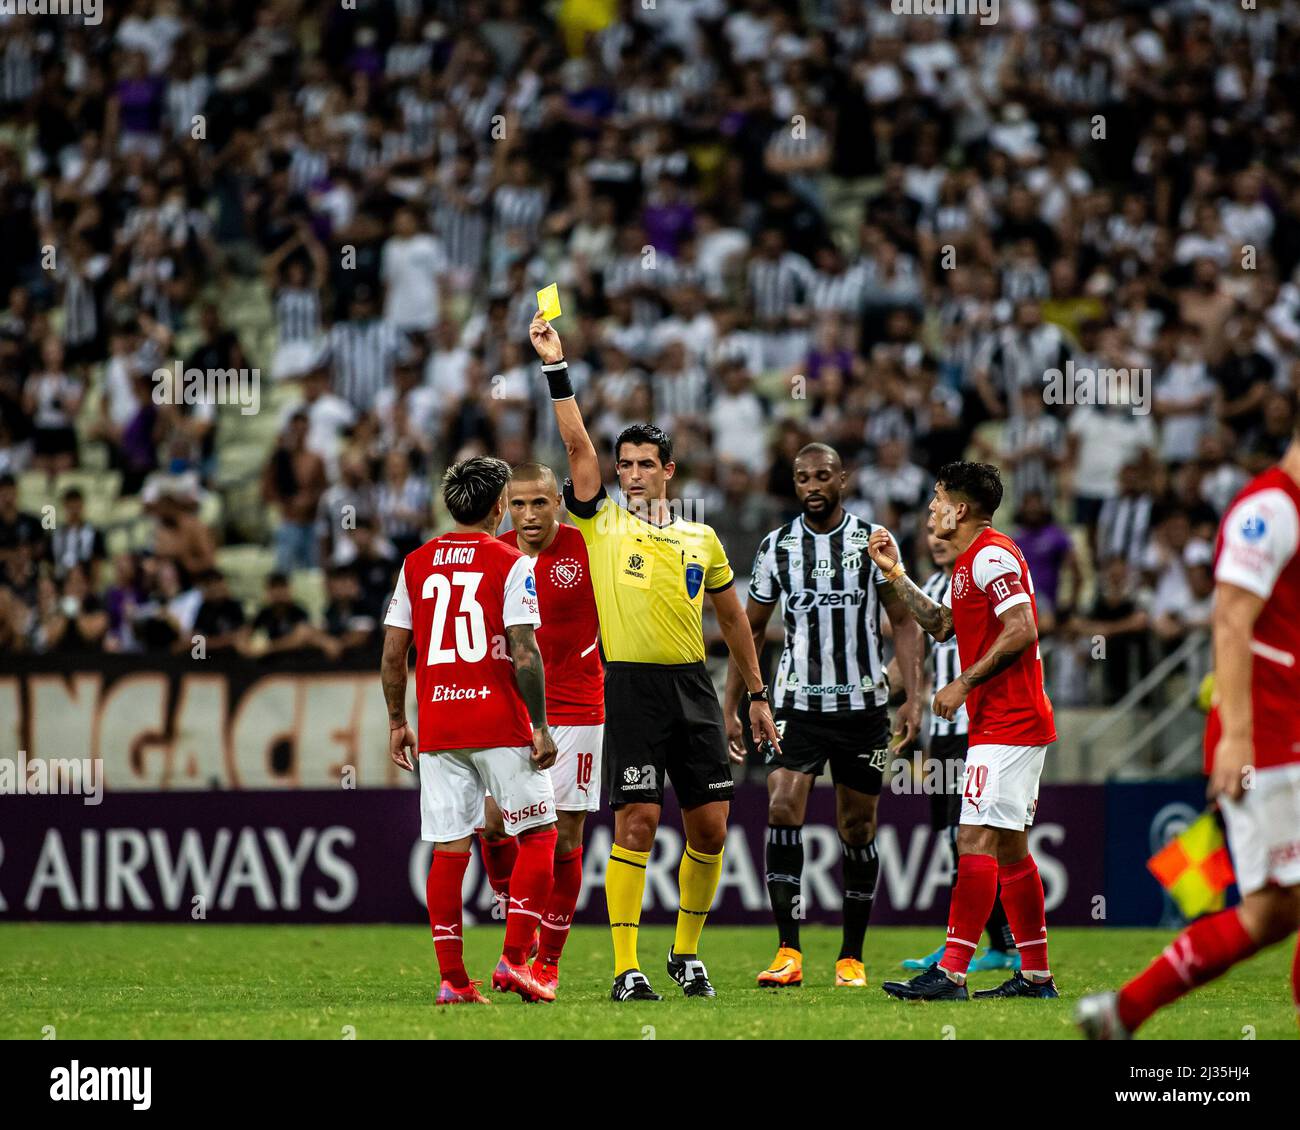 Fortaleza, Brazil. 05th Apr, 2022. CE - Fortaleza - 04/05/2022 - COPA SOUTH AMERICANA 2022, CEARA X INDEPEDIENTE - Referee Gonzalez Cabrera during a match between Ceara and Independiente at the Arena Castelao stadium for the Copa Sudamericana 2022 championship. Photo: Pedro Chaves/AGIF/Sipa USA Credit: Sipa USA/Alamy Live News Stock Photo